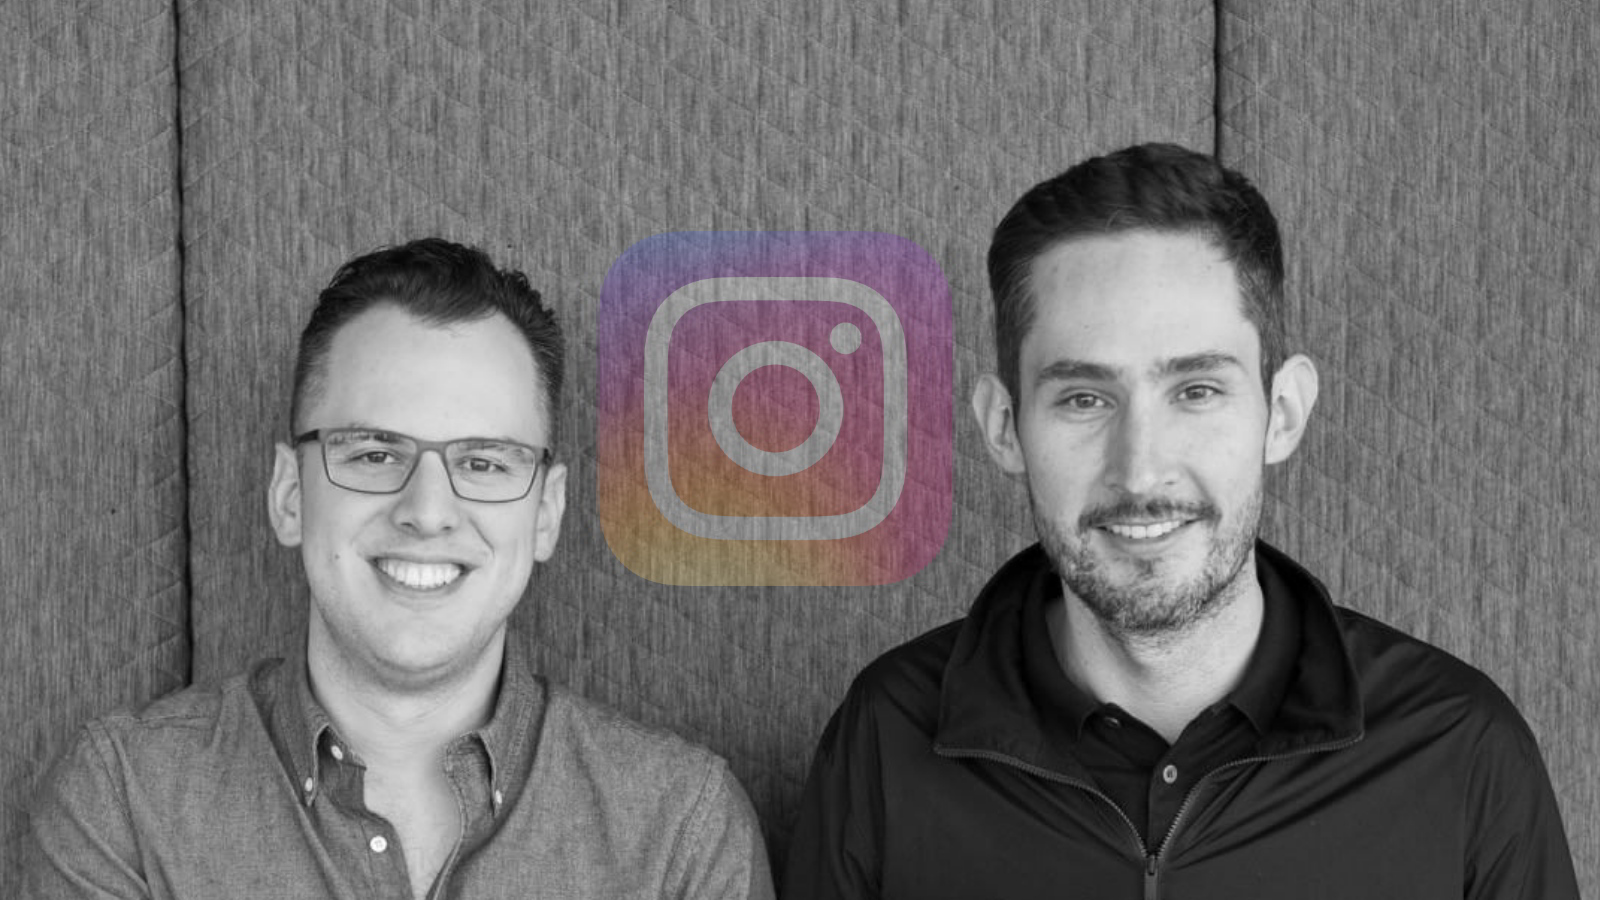 kevin-systrom-and-mike-krieger-co-founder-of-instagram.jpg